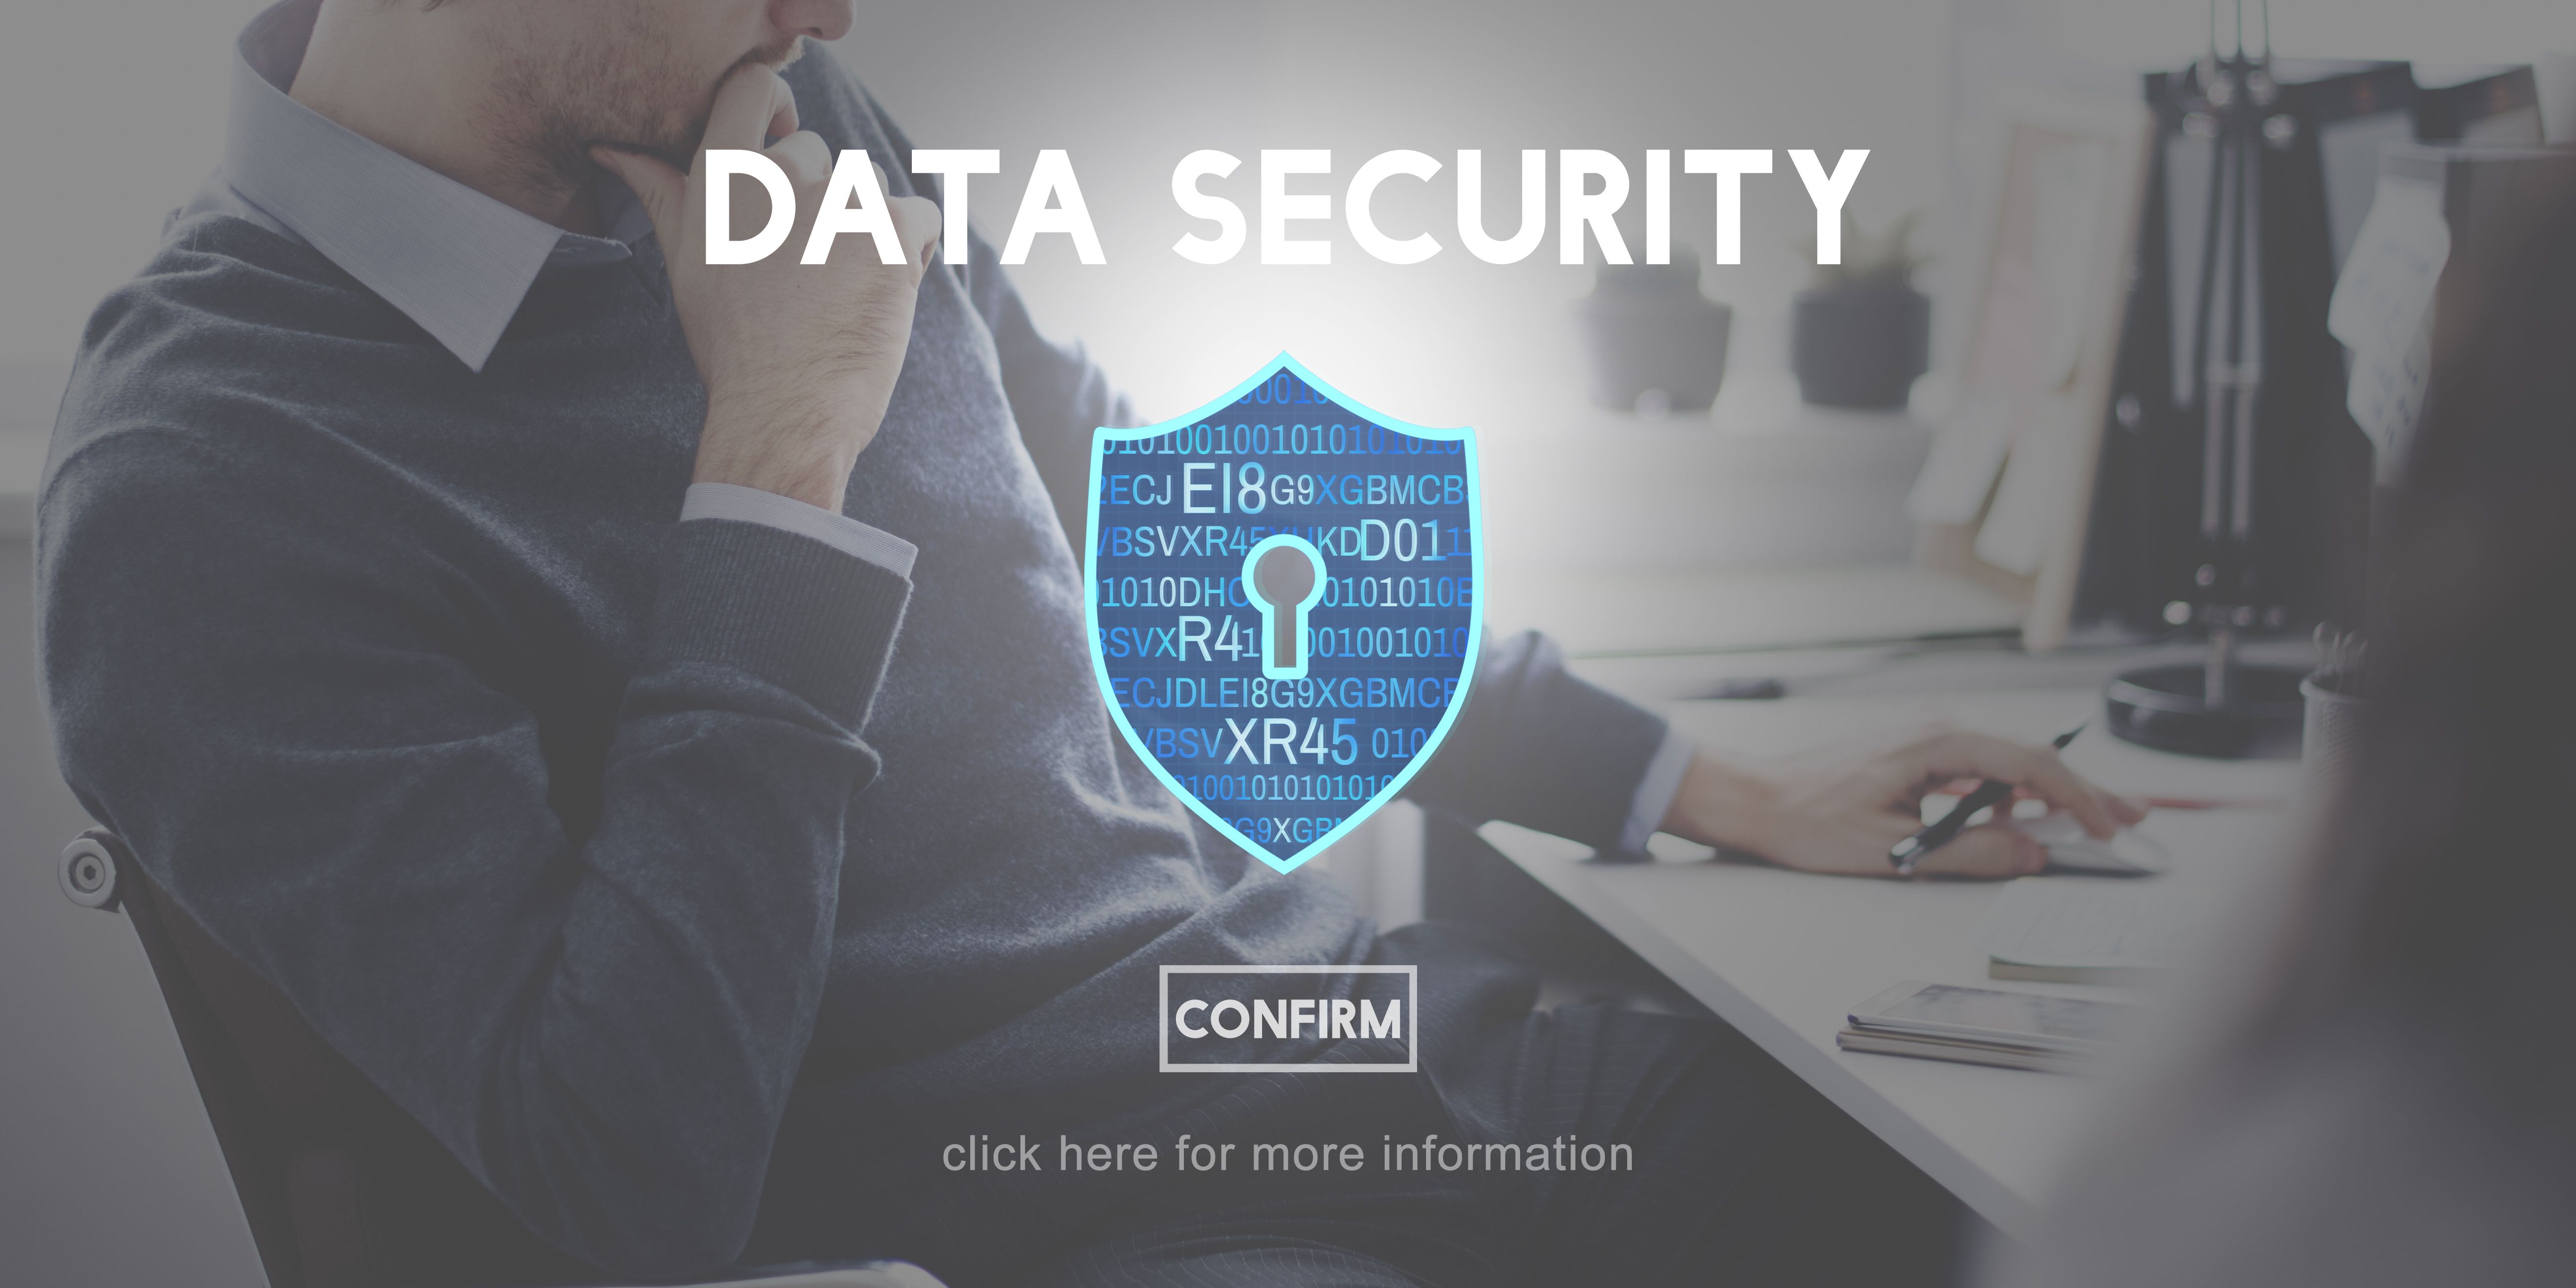 MSPs should keep these data security tips in mind when supporting SMBs.